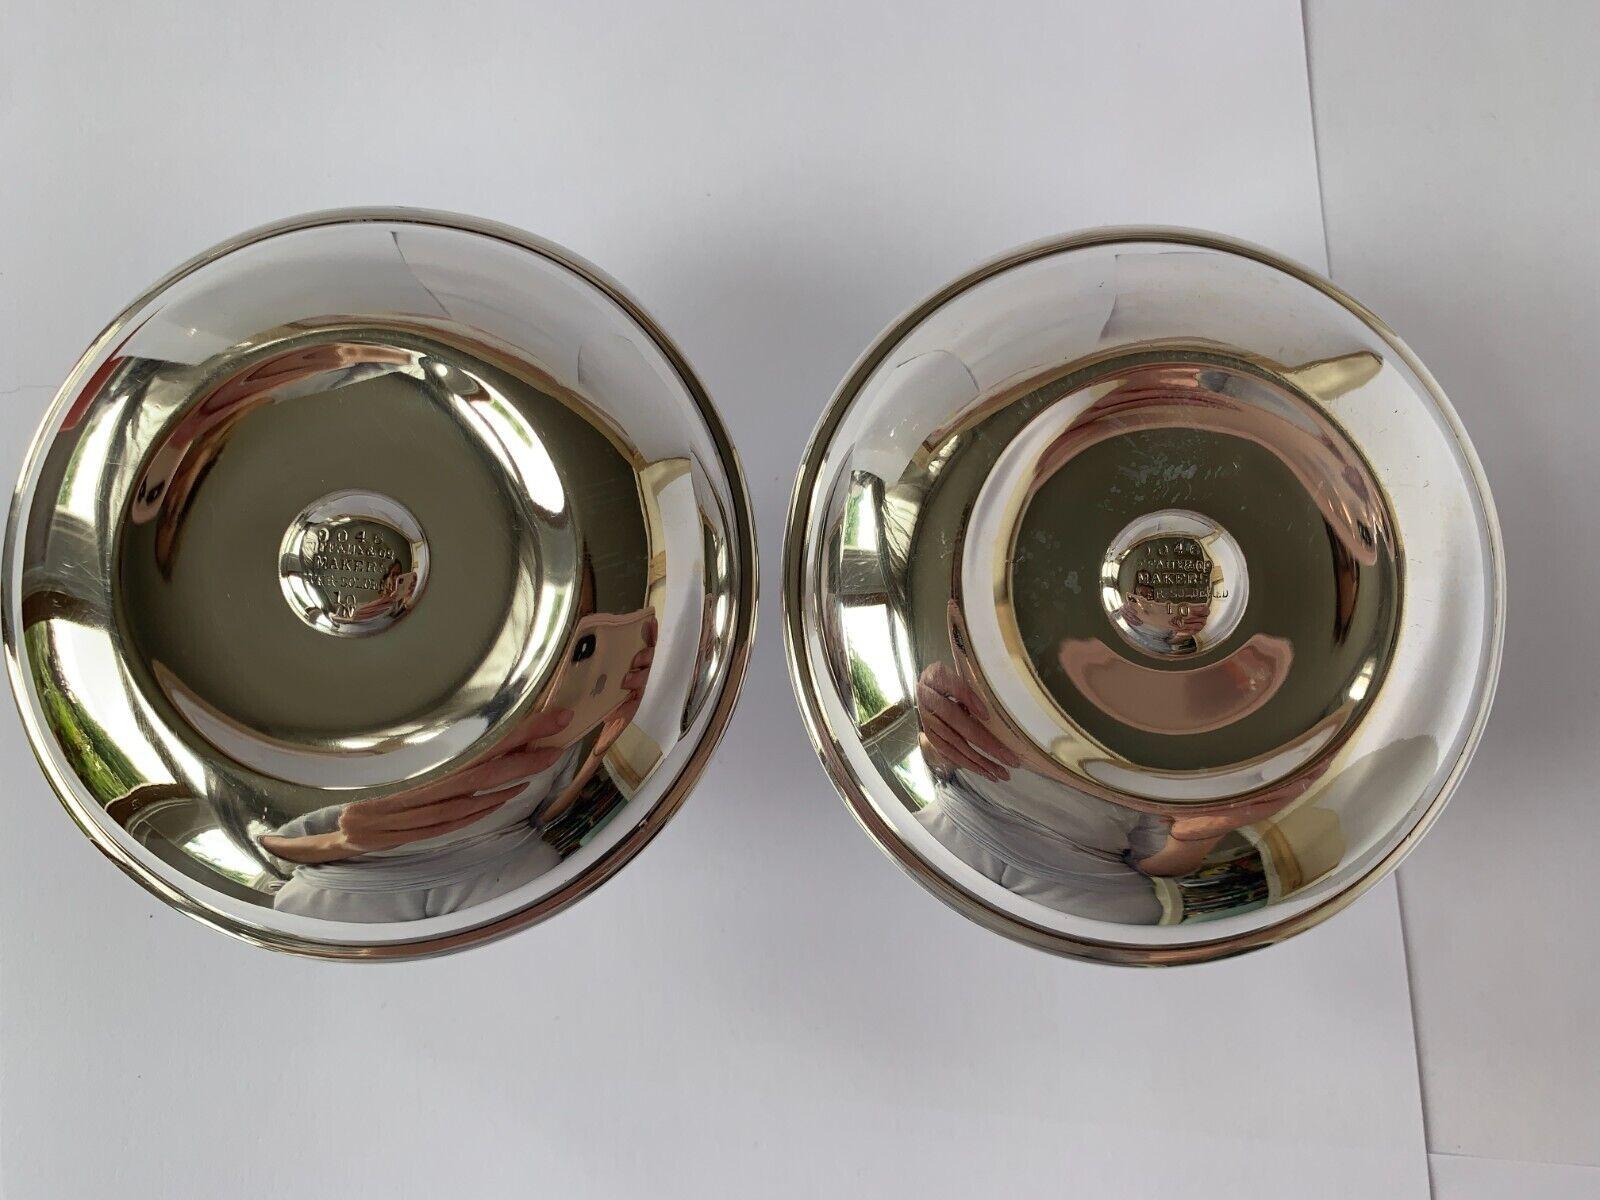 Pair of Sterling Silver Saucer Candle Holders.
This is a lovely unusual pair of saucer candle holders that are beautifully made. They would look lovely on any table.
In good vintage condition, they have a couple of small marks on the undersides.